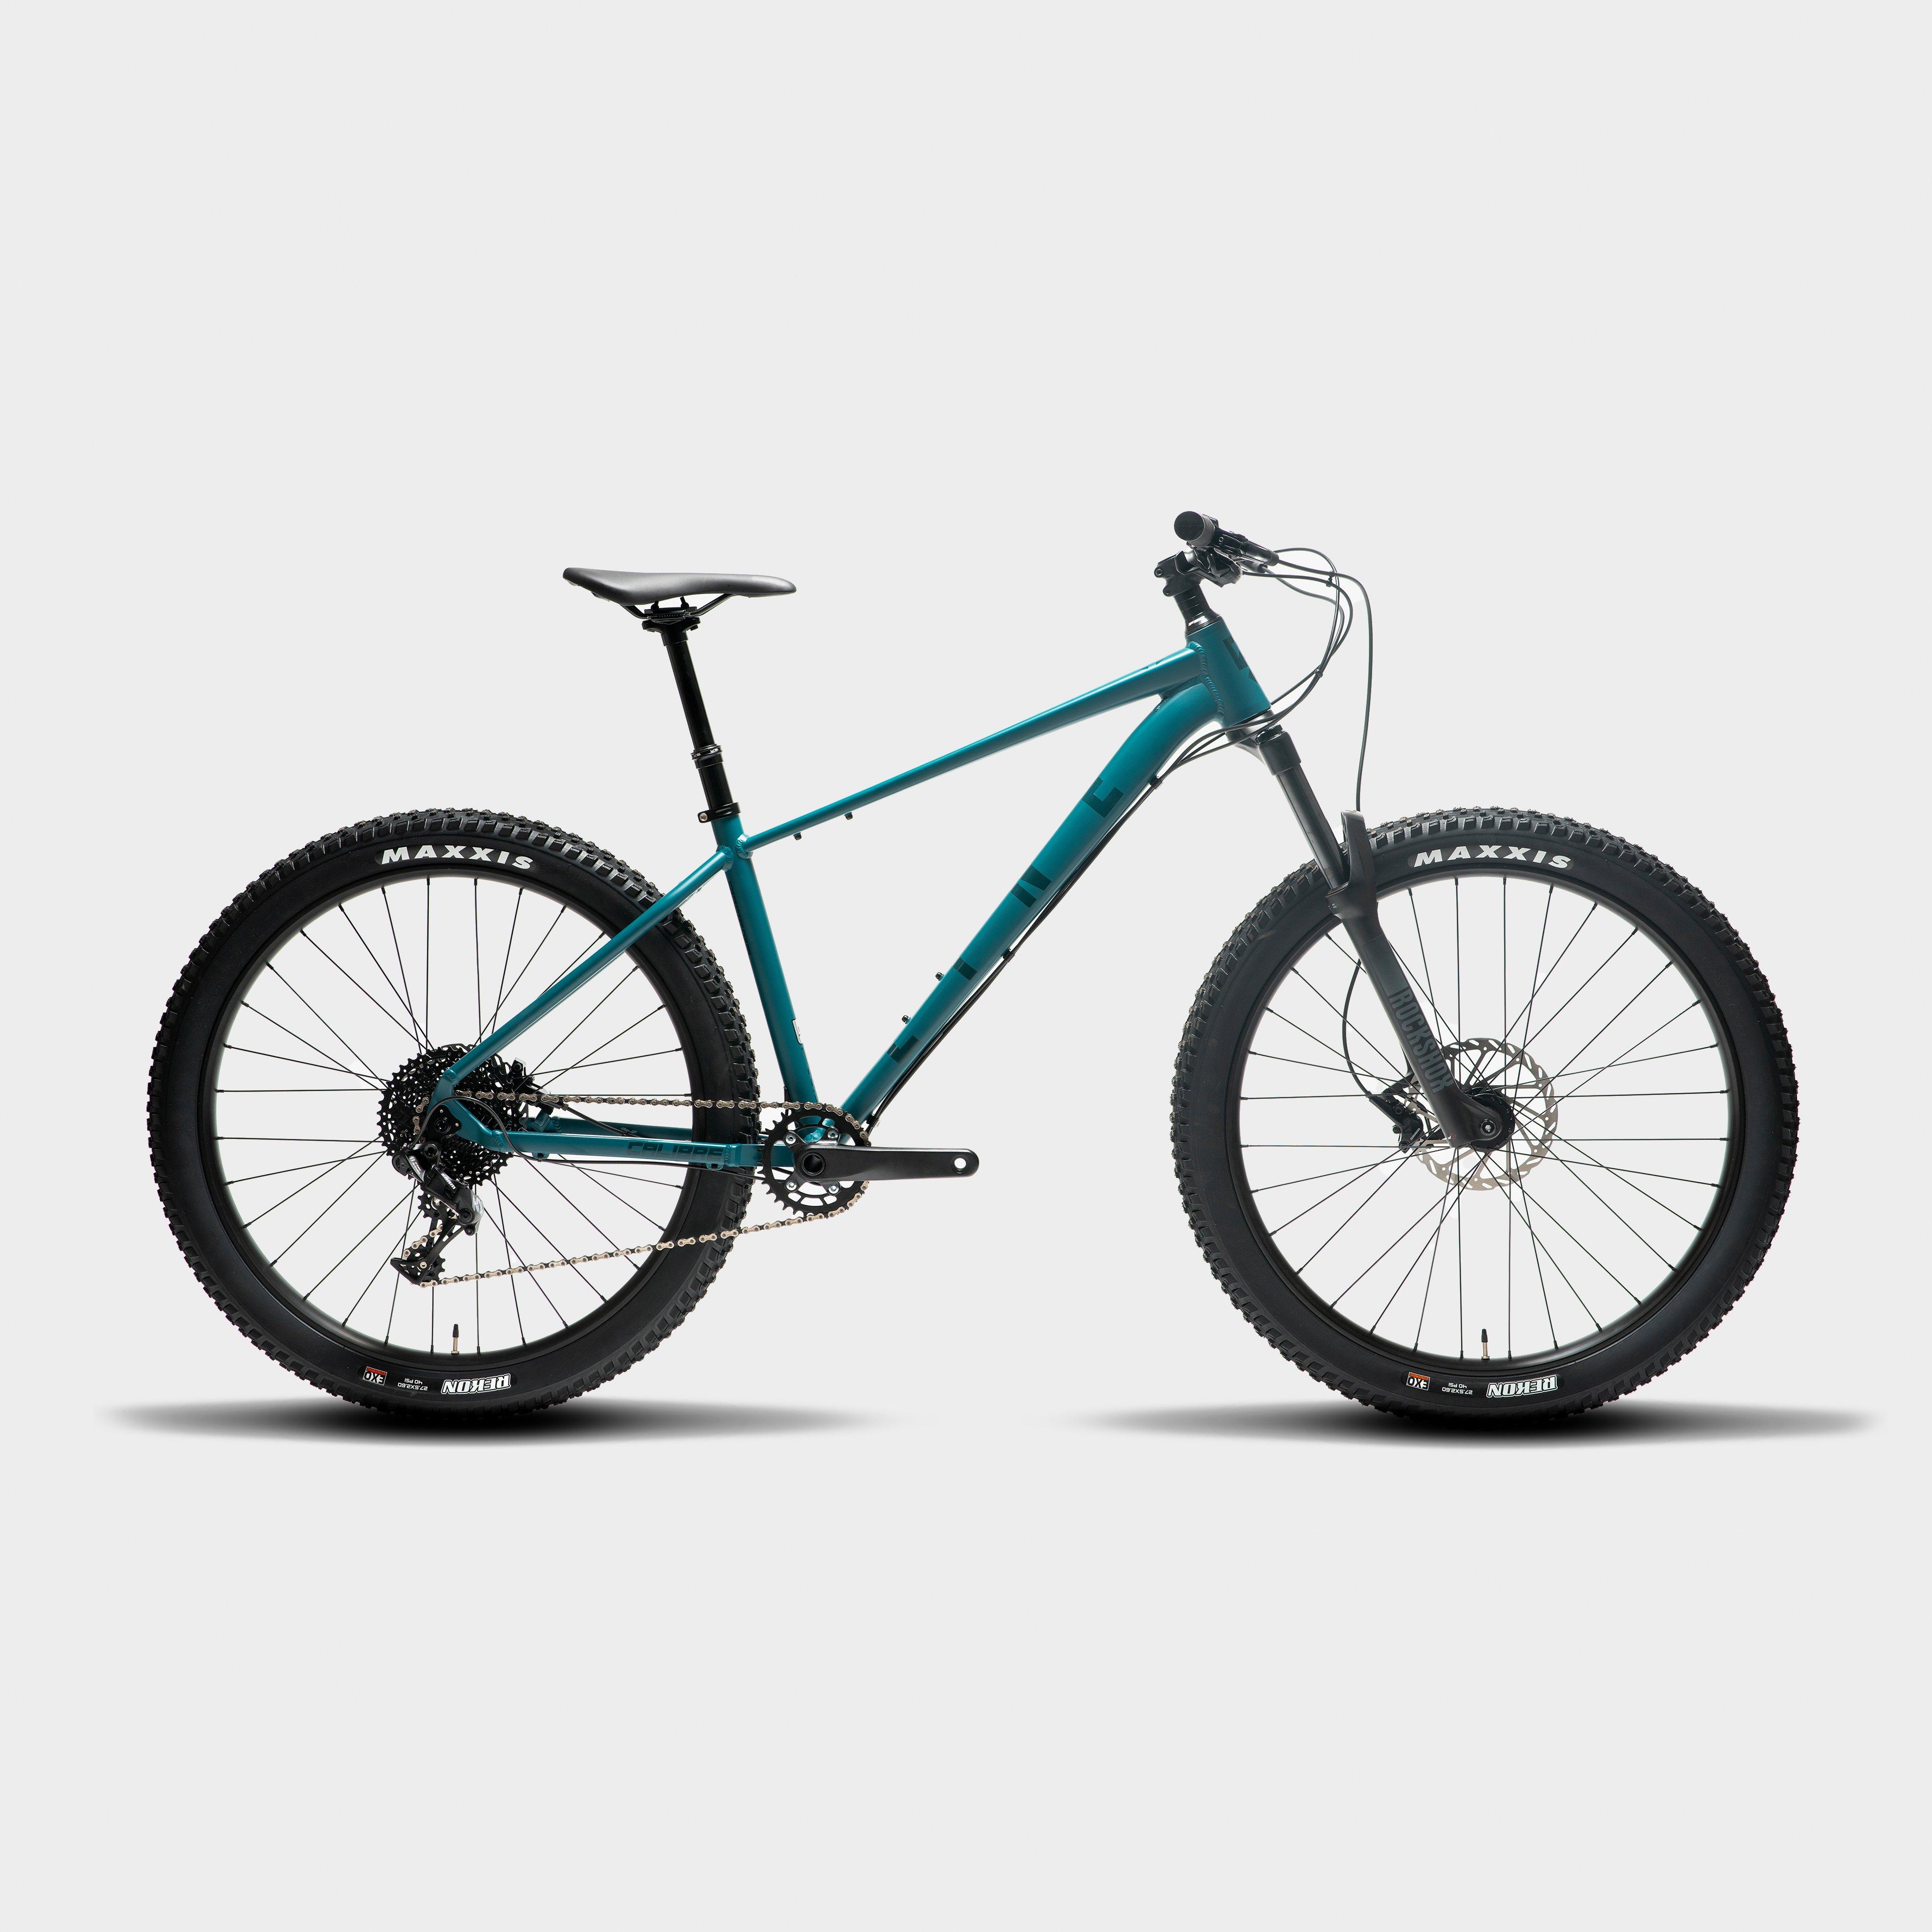 Calibre Calibre Line T3 27.5" Hardtail Mountain Bike - Gry, GRY